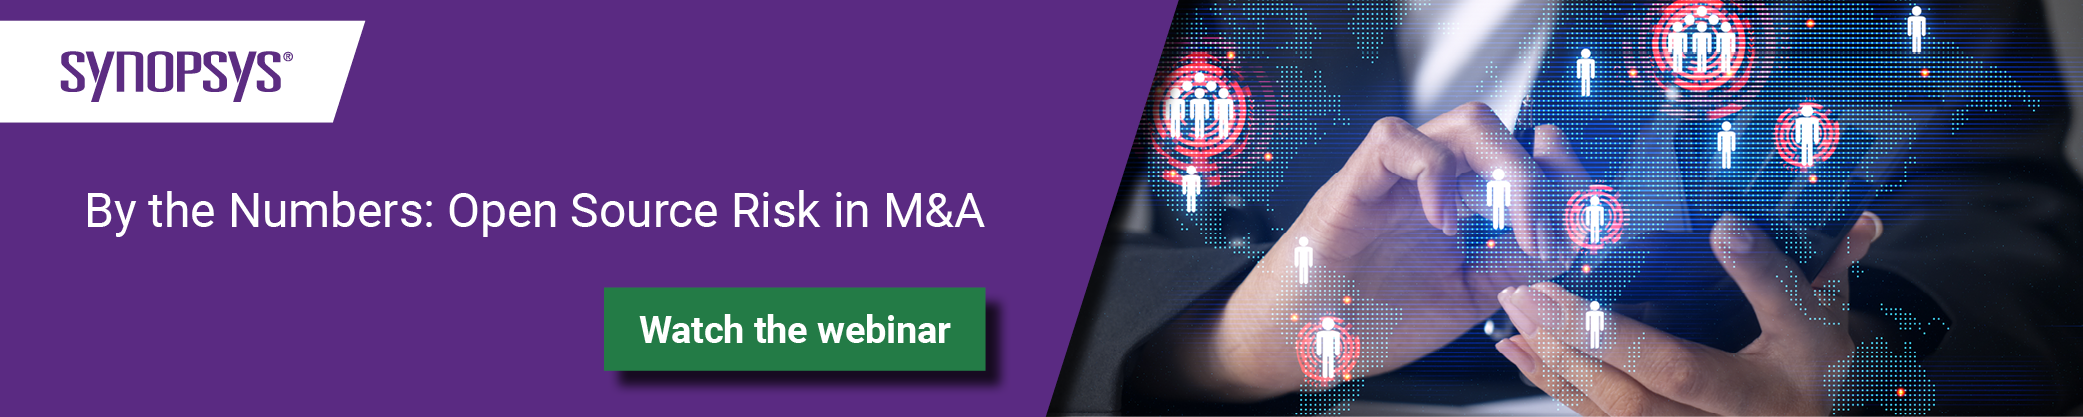 By the Numbers: Open Source Risk in M&A Webinar | Synopsys